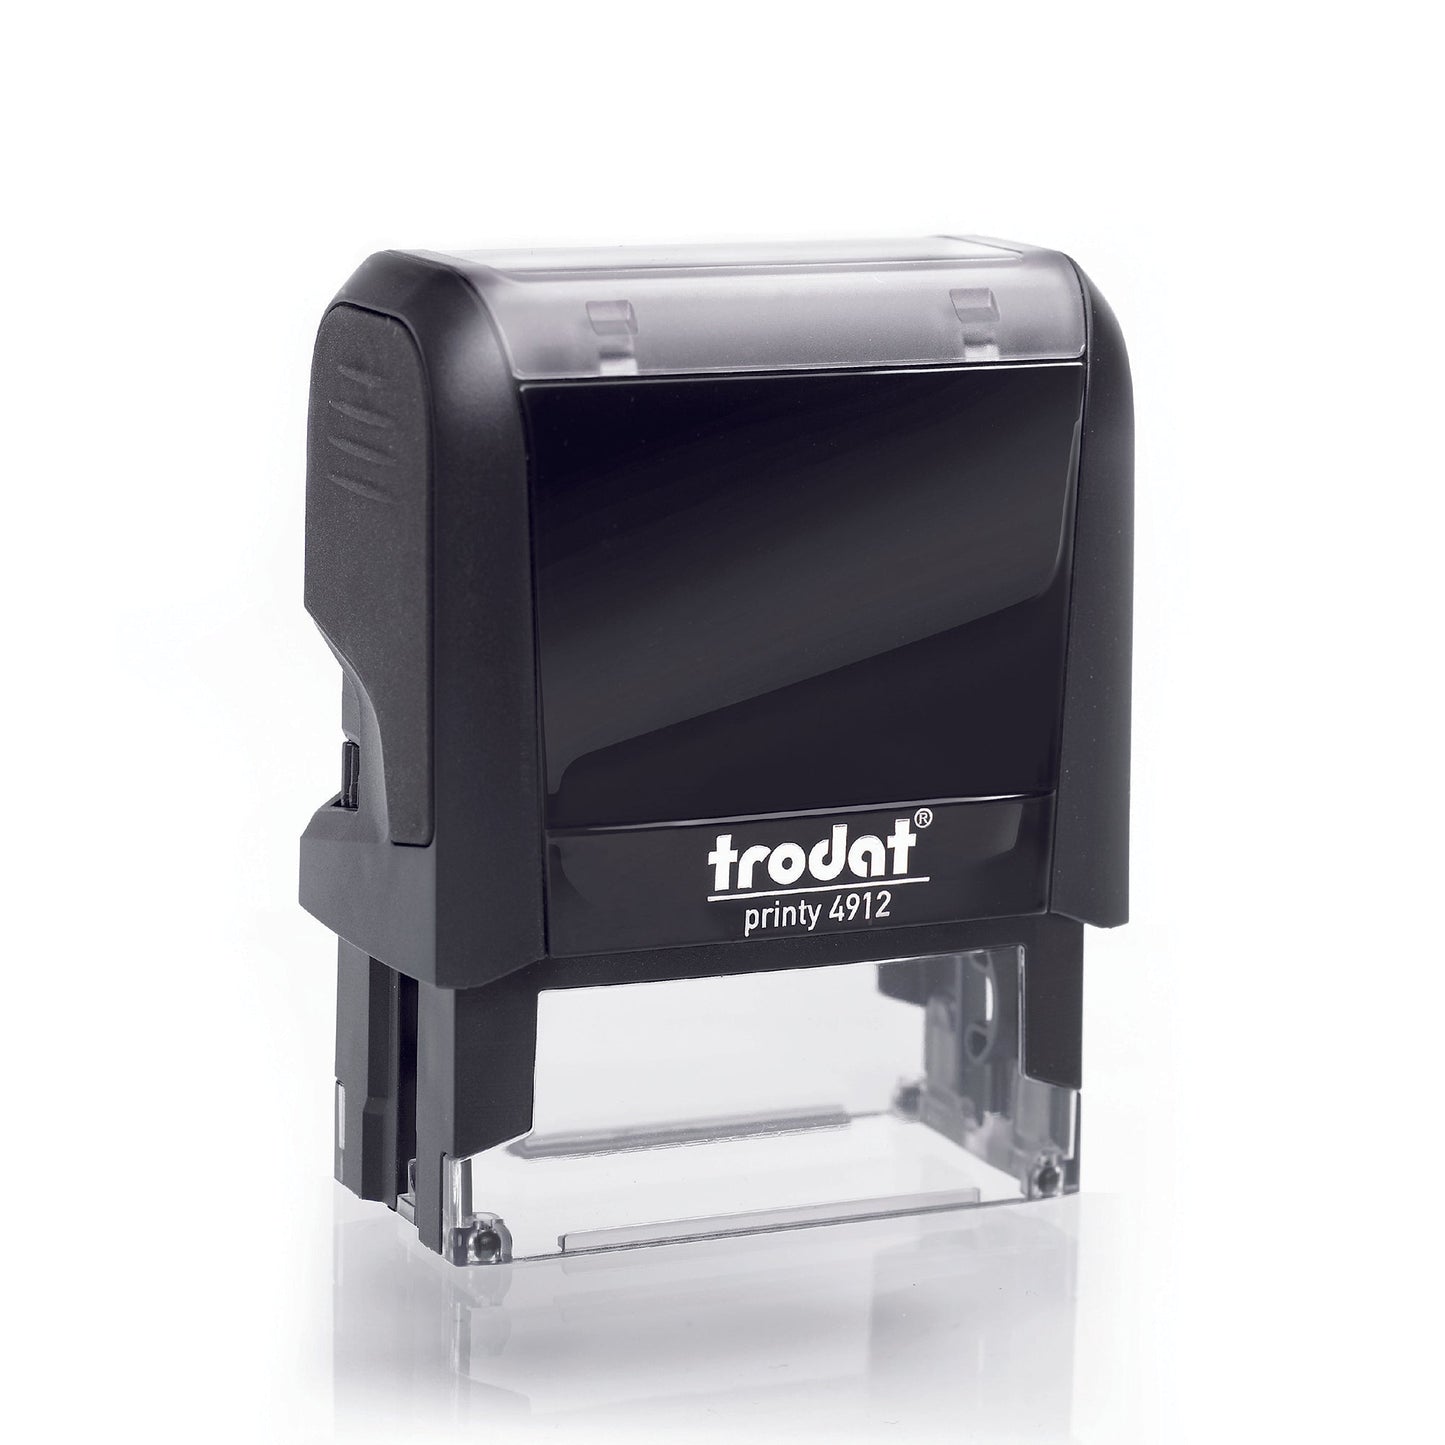 Overdue - Rubber Stamp - Trodat 4912 - 45mm x 18mm Impression